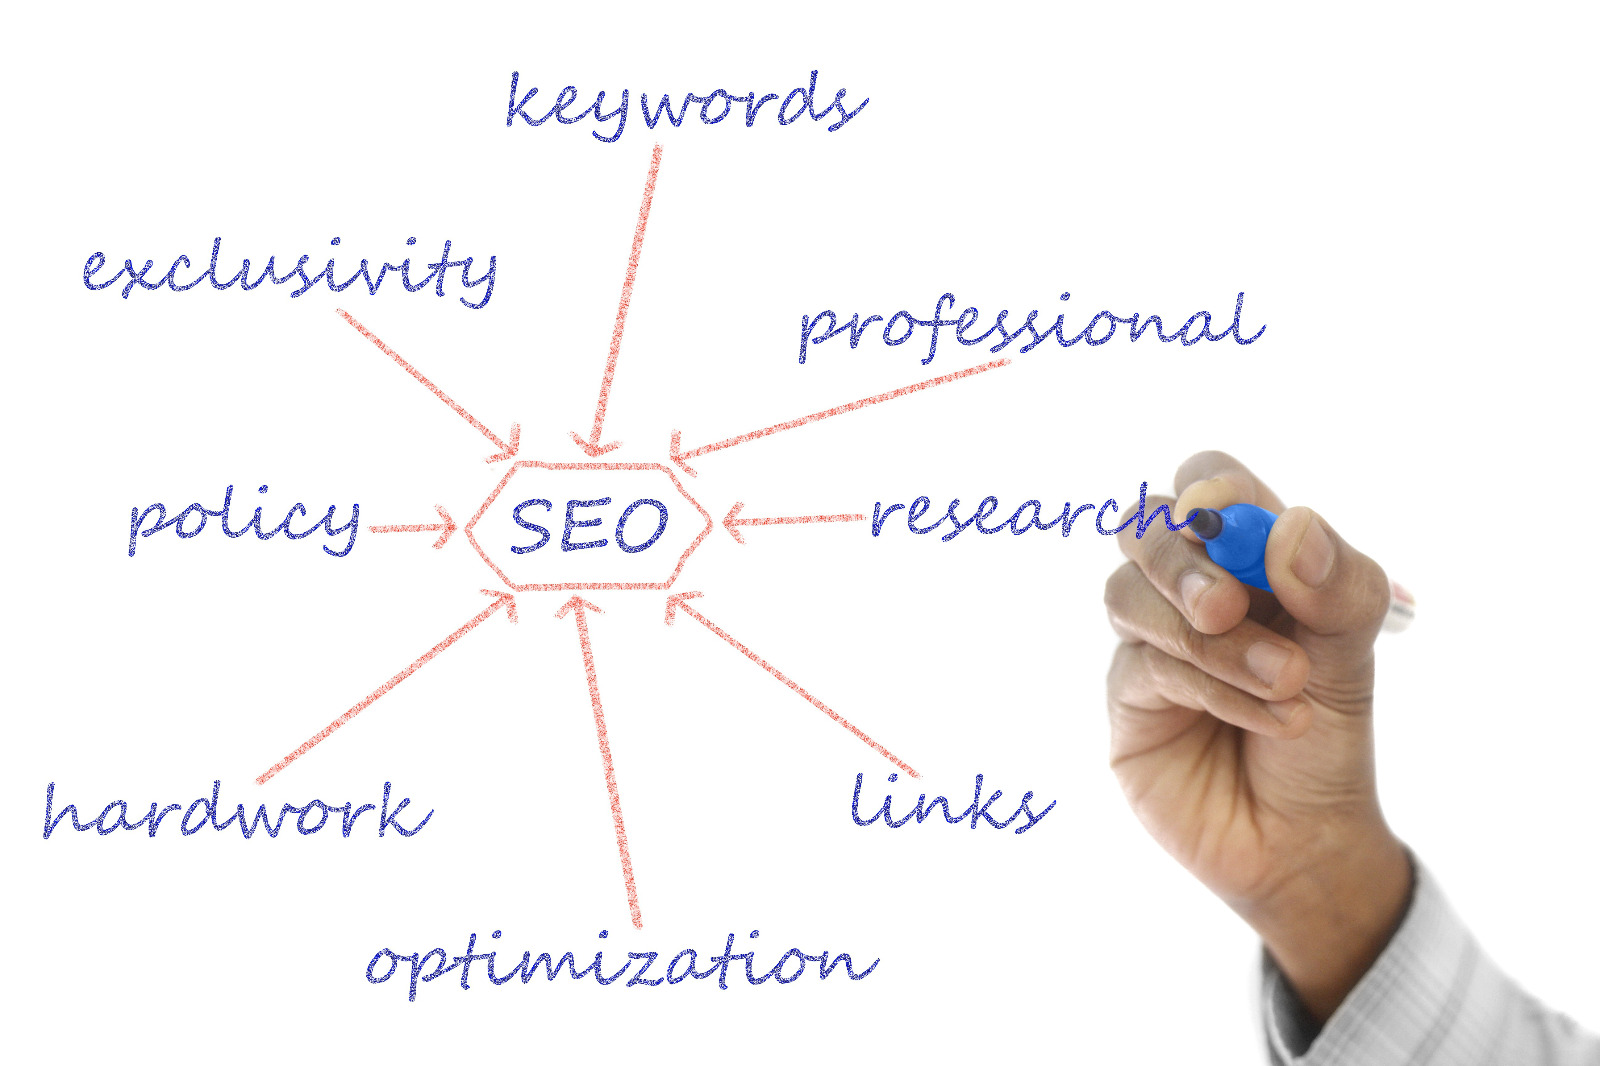 WHY YOUR BIZ NEEDS AN SEO PRO: THE UNMISSABLE BENEFITS